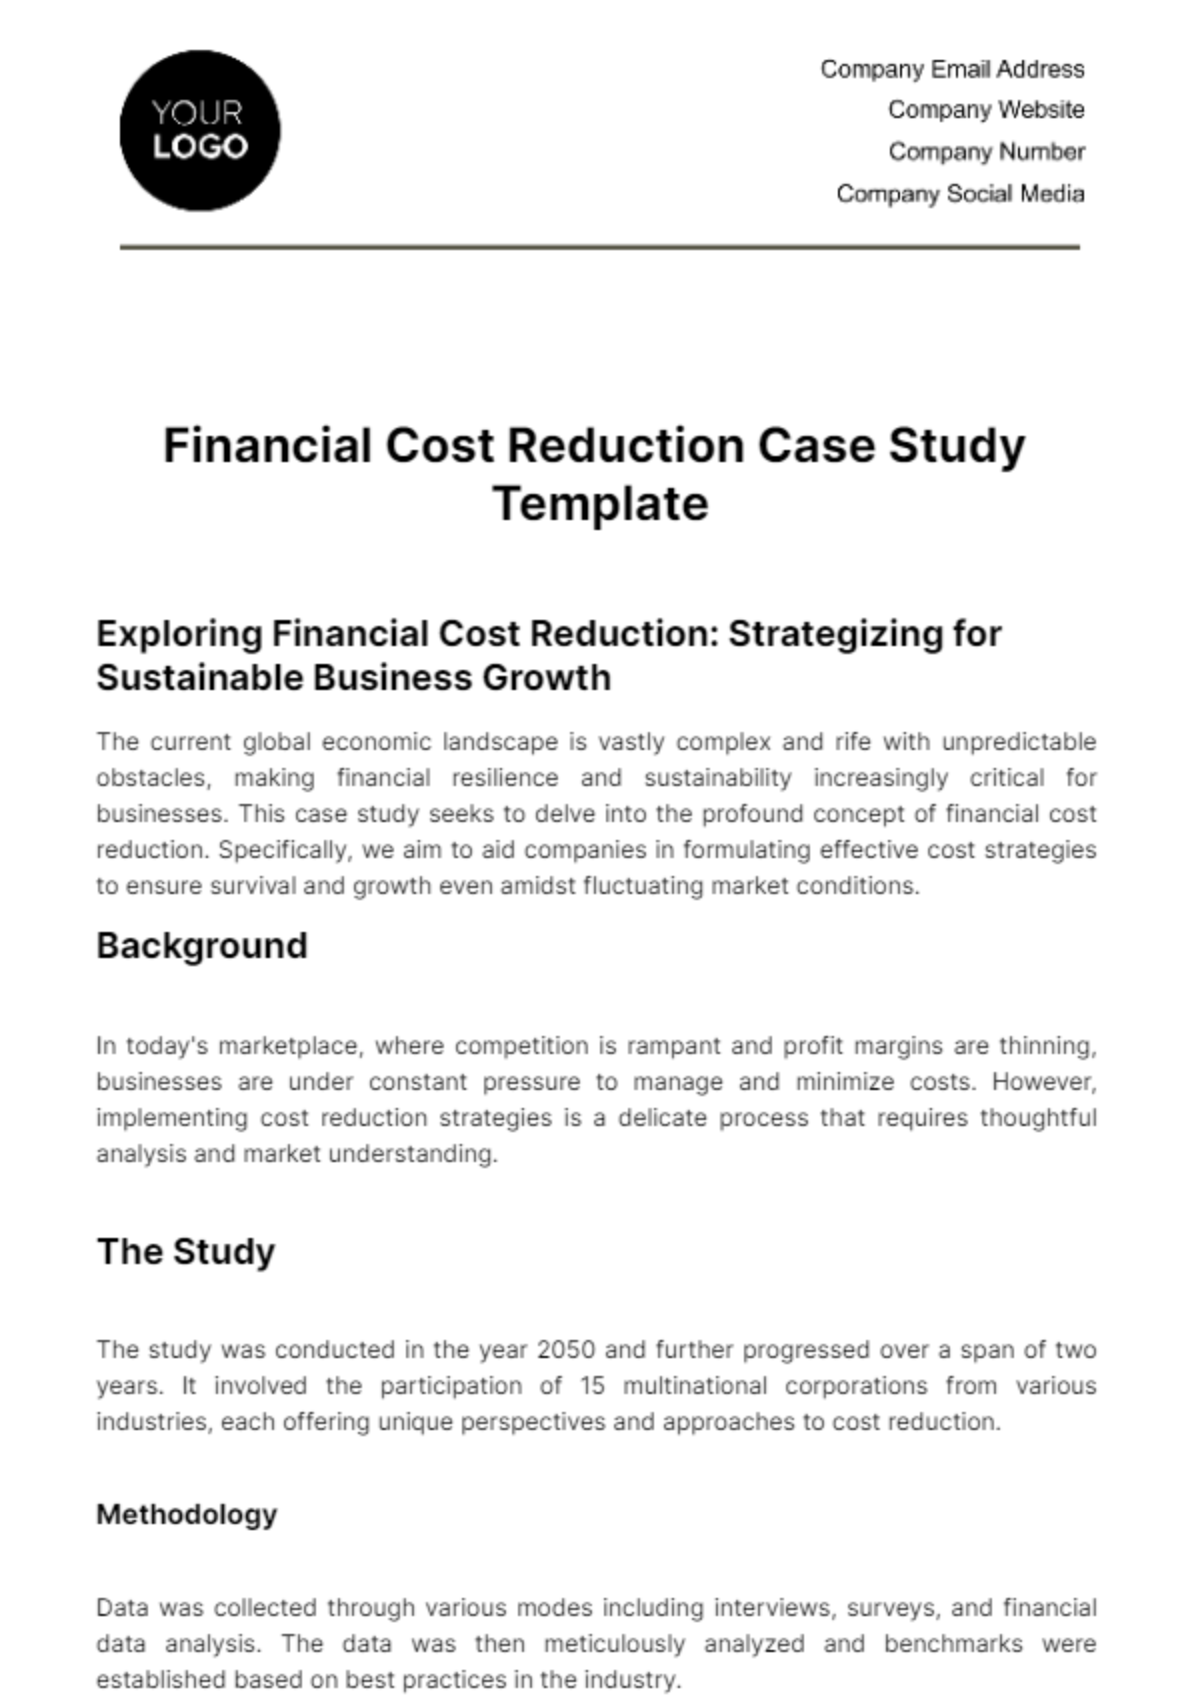 Free Financial Cost Reduction Case Study Template